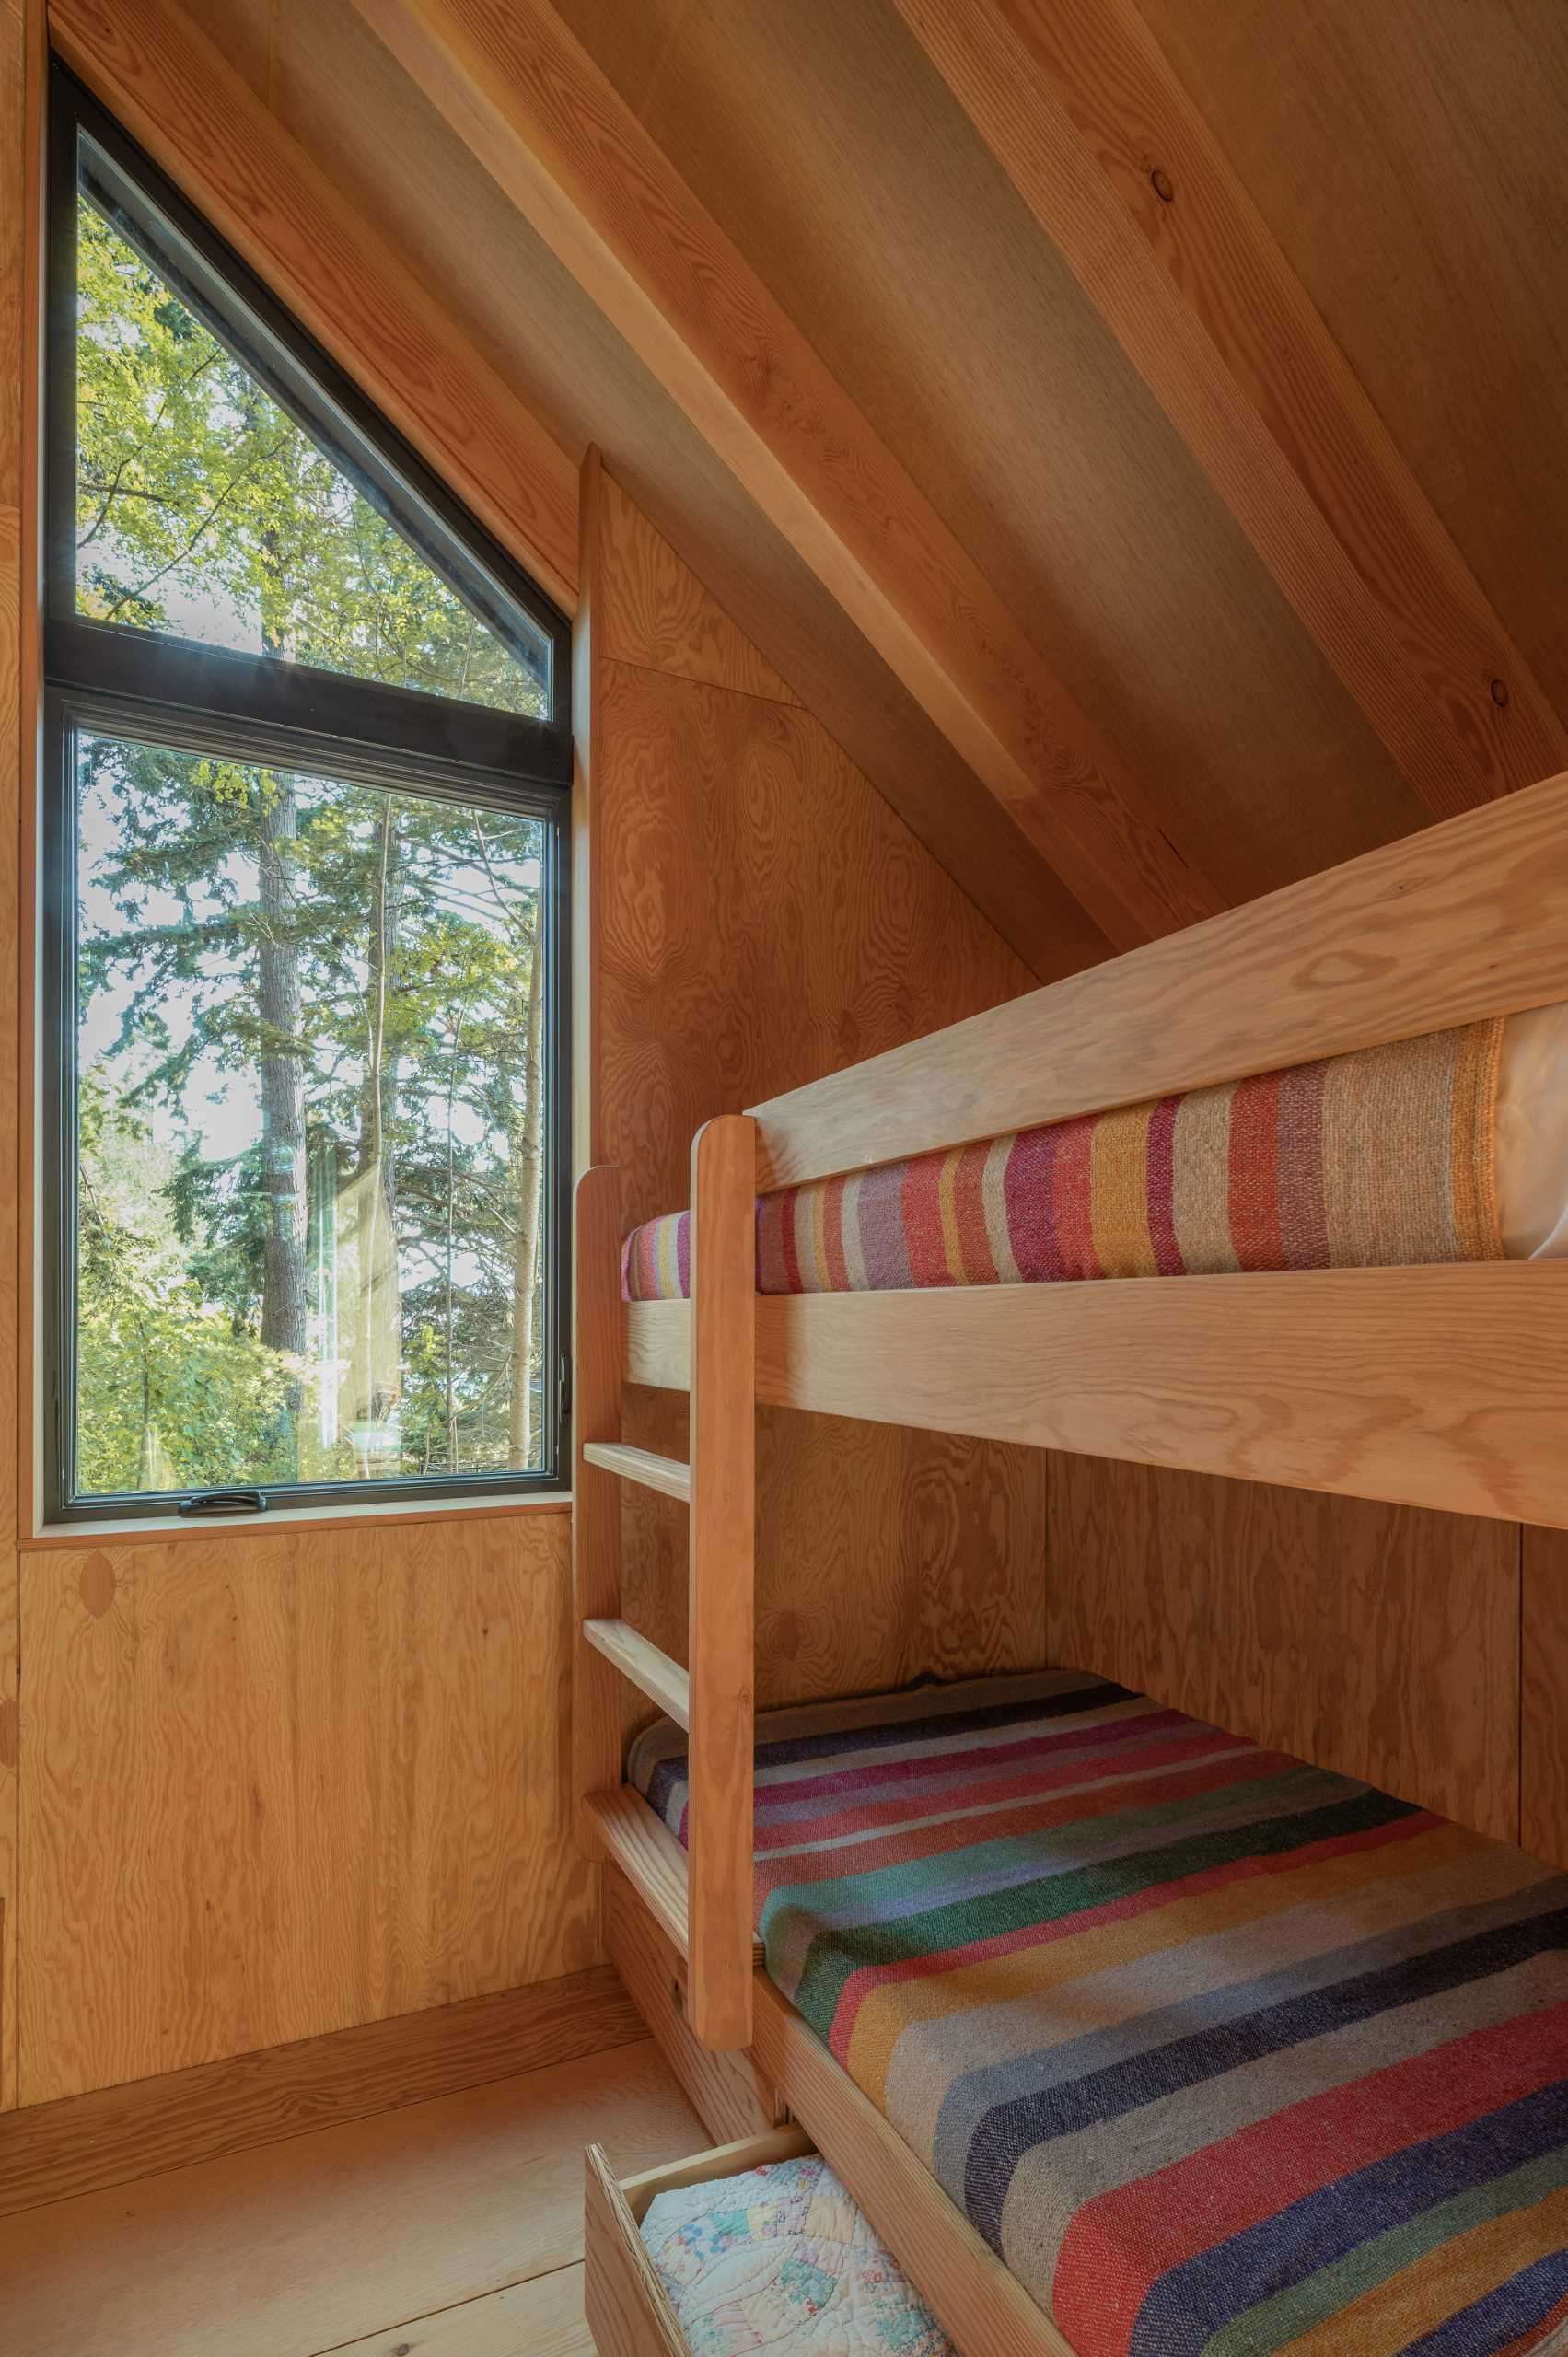 The bedrooms in this cabin are located on either side of the lounge area, with both bunk beds and regular beds. Curtains can be drawn to provide privacy when needed.